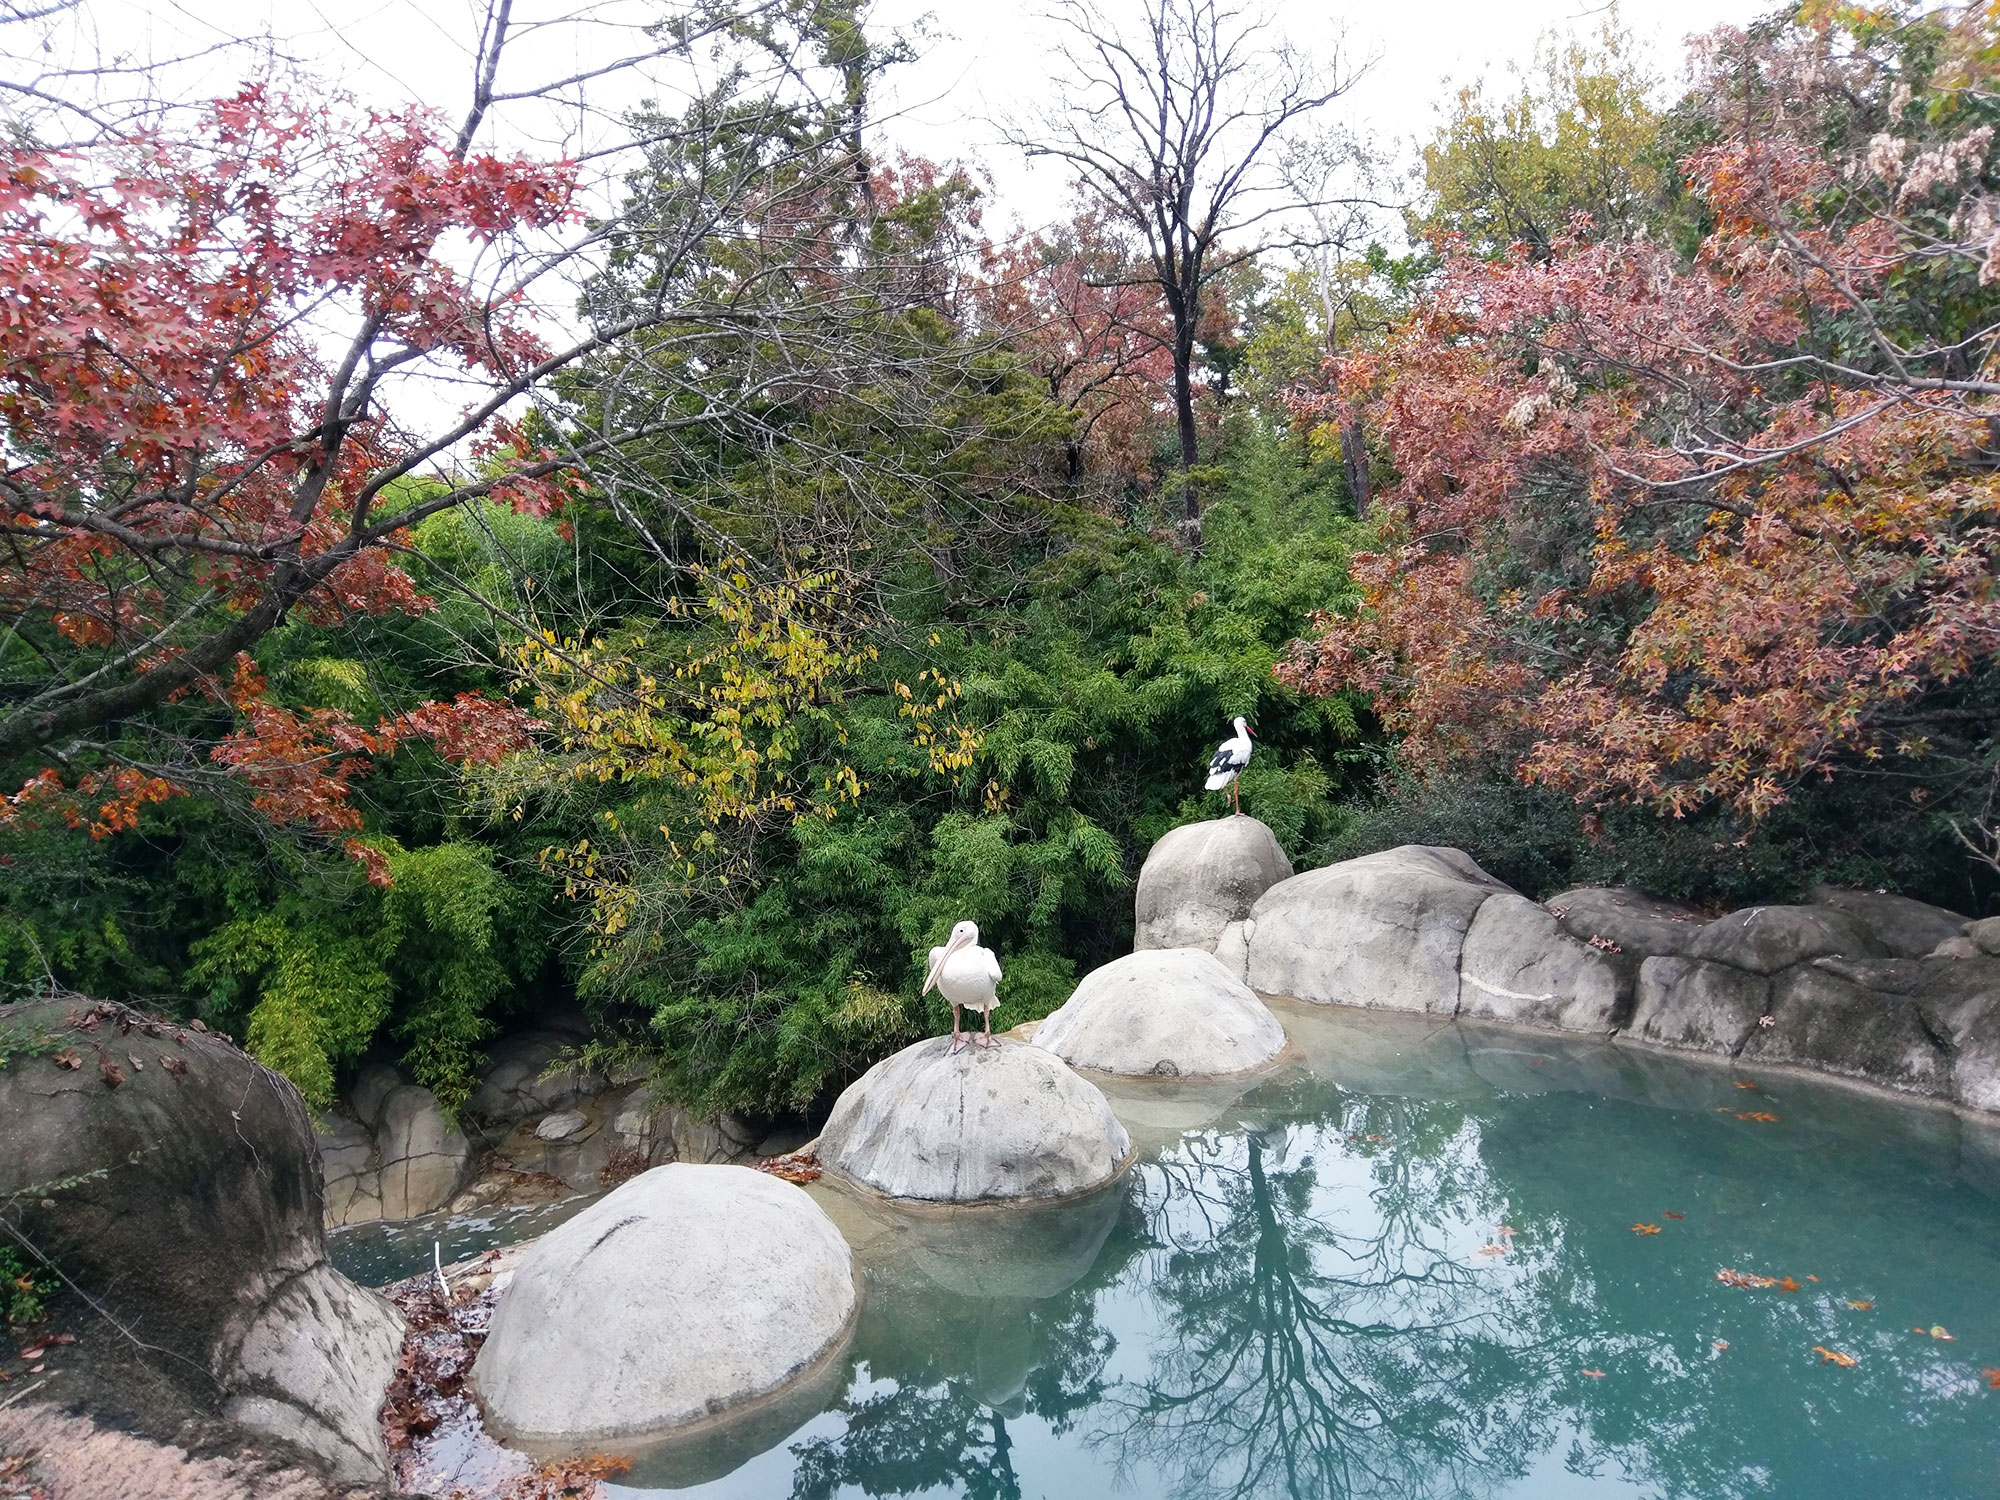 Birds and a waterfall at the Dallas Zoo.